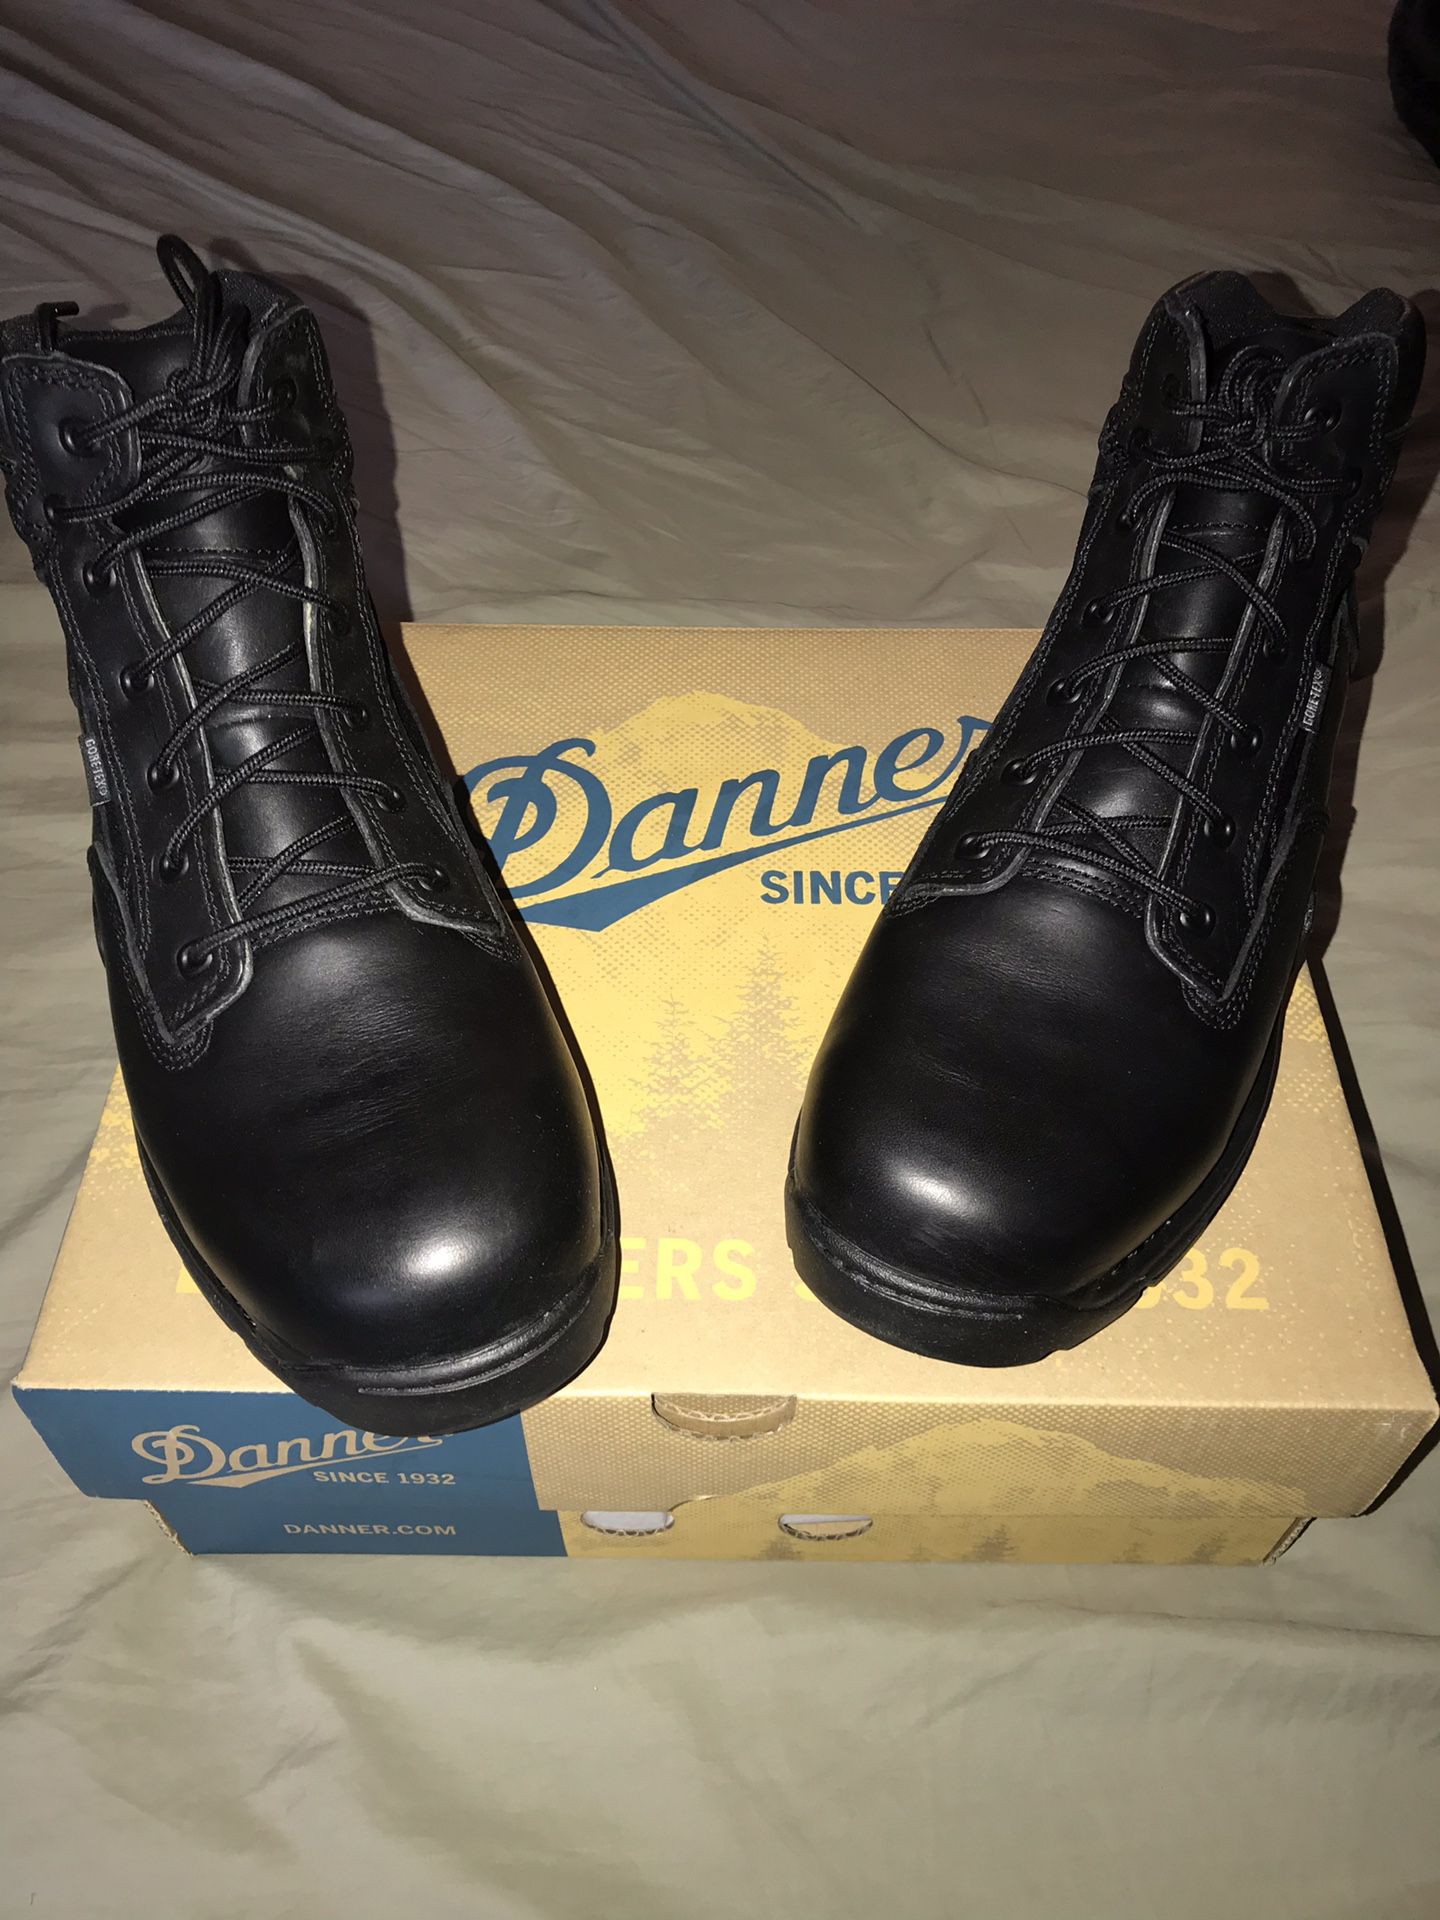 Danner Boots Size 11 EE